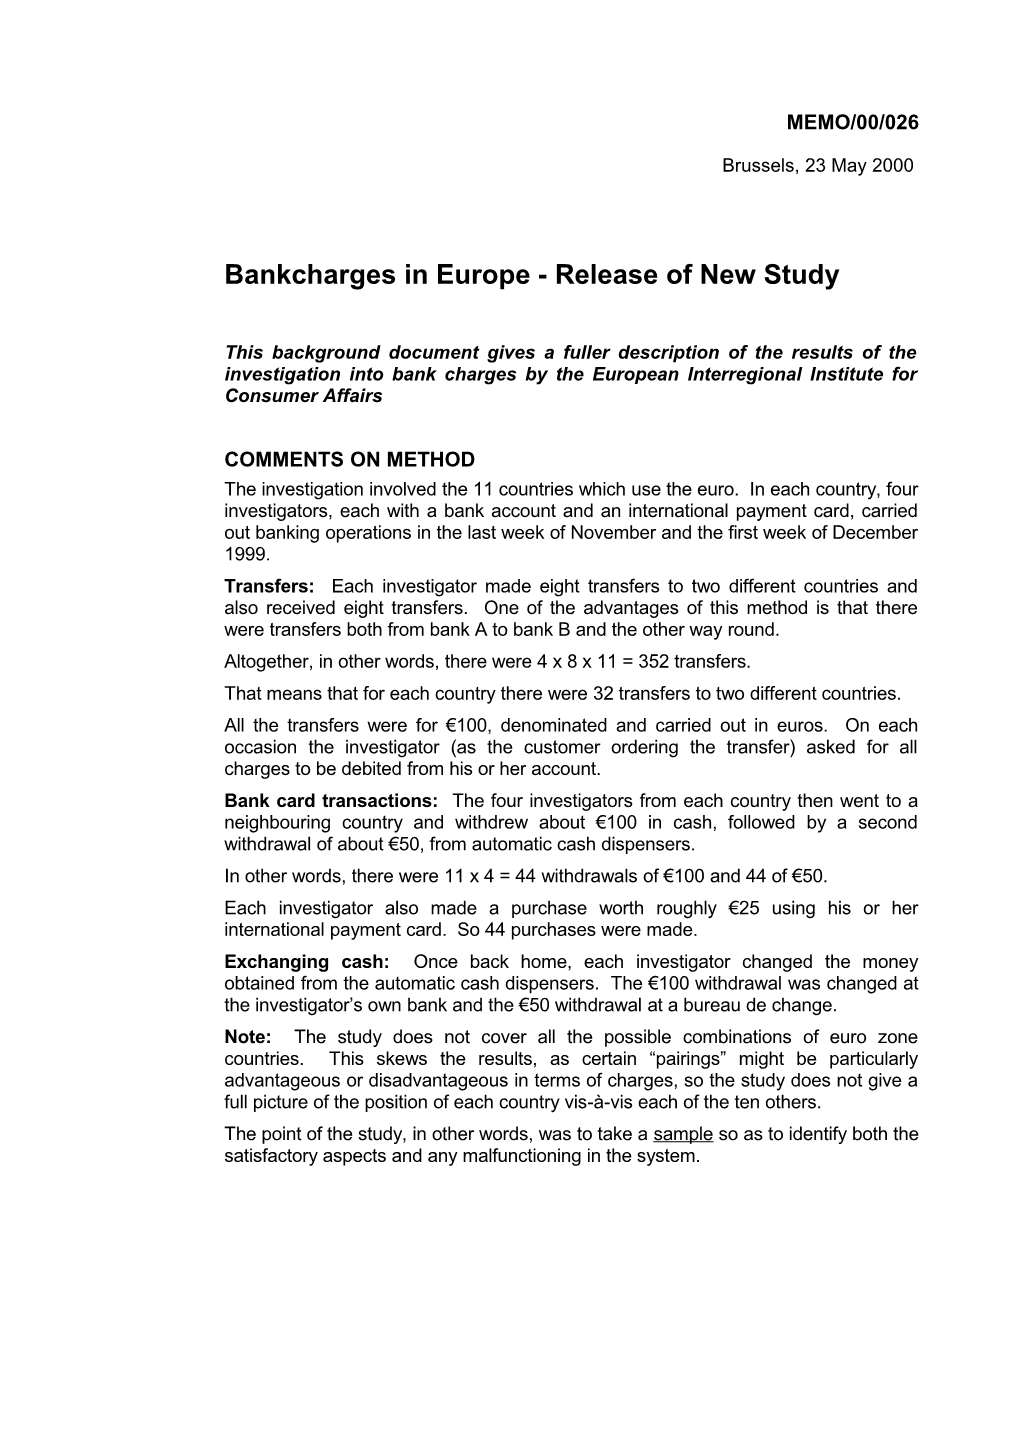 Bankcharges in Europe - Release of New Study